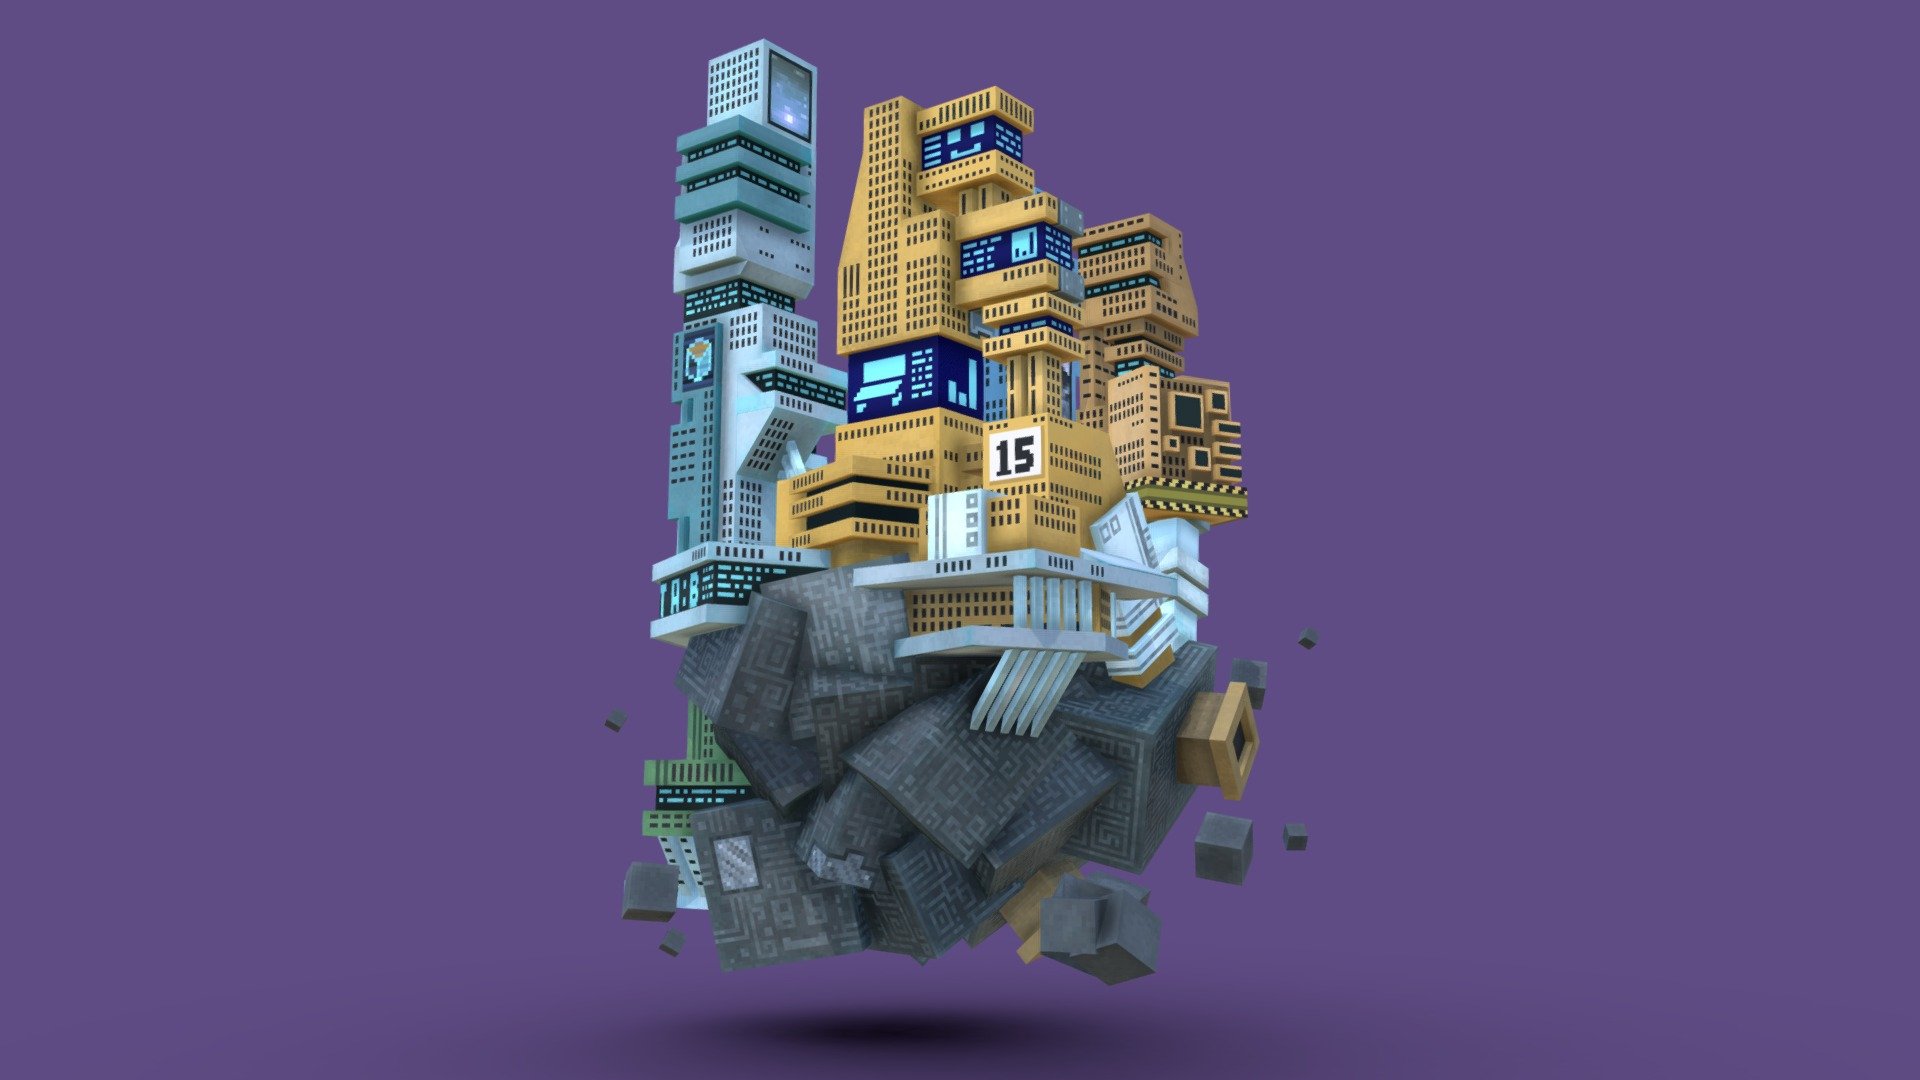 Cyberpunk / futuristic style island that i made in blockbench, spent about a week on this. 257 cubes. Includues buildings like Blockbench HQ. Thanks to Kanno_ for the name :) - 2045 VESTA:B - Download Free 3D model by Wacky (@wackyblocks) 3d model